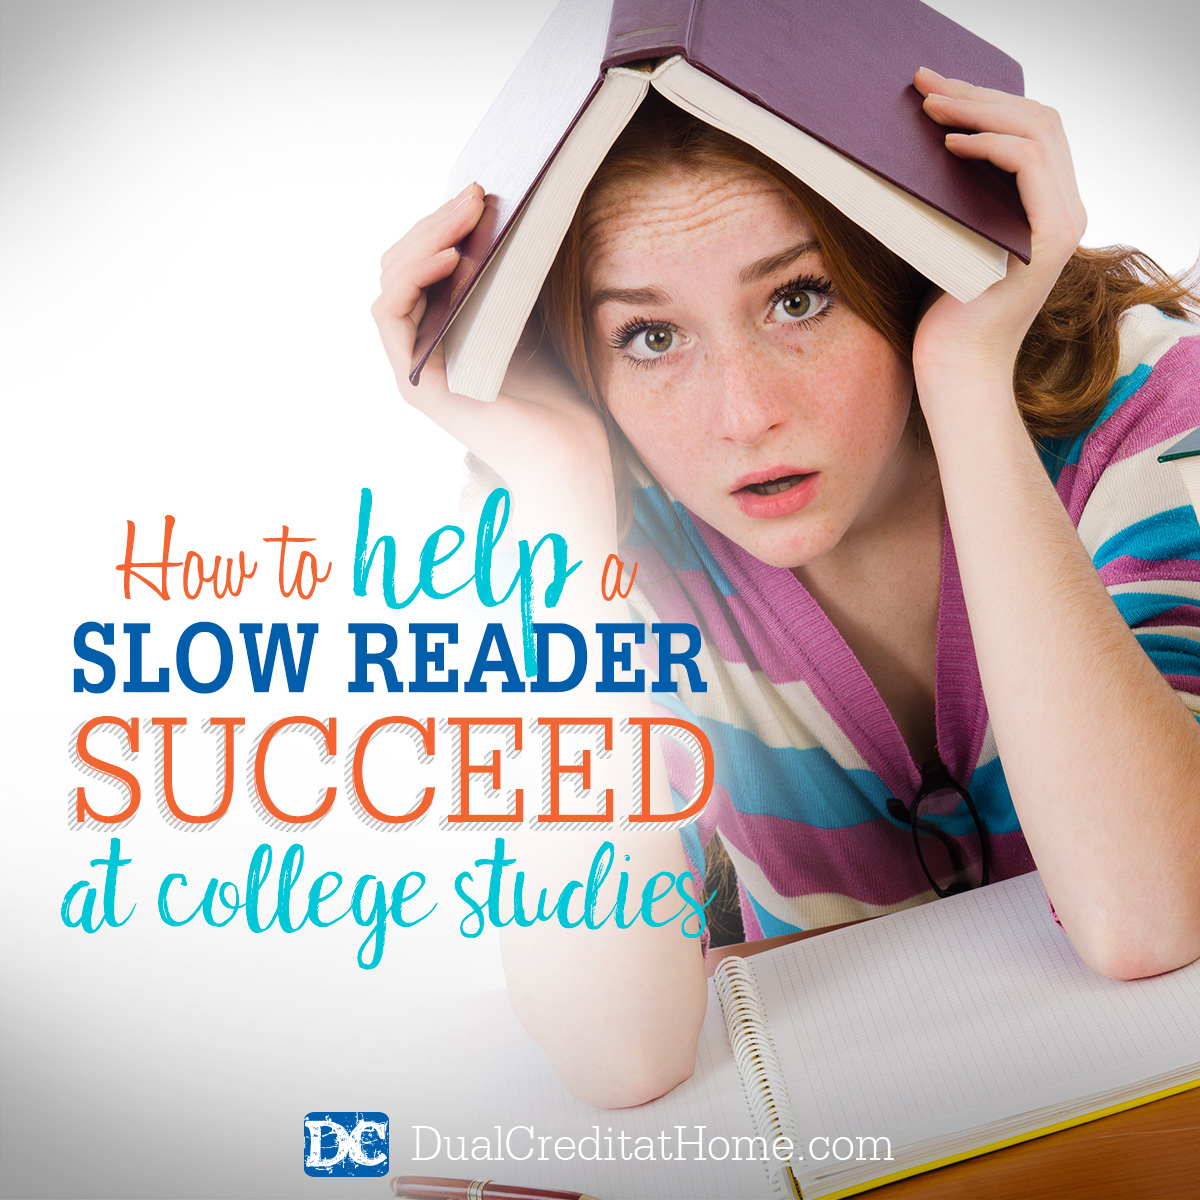 How to Help a Slow Reader Succeed at College Studies